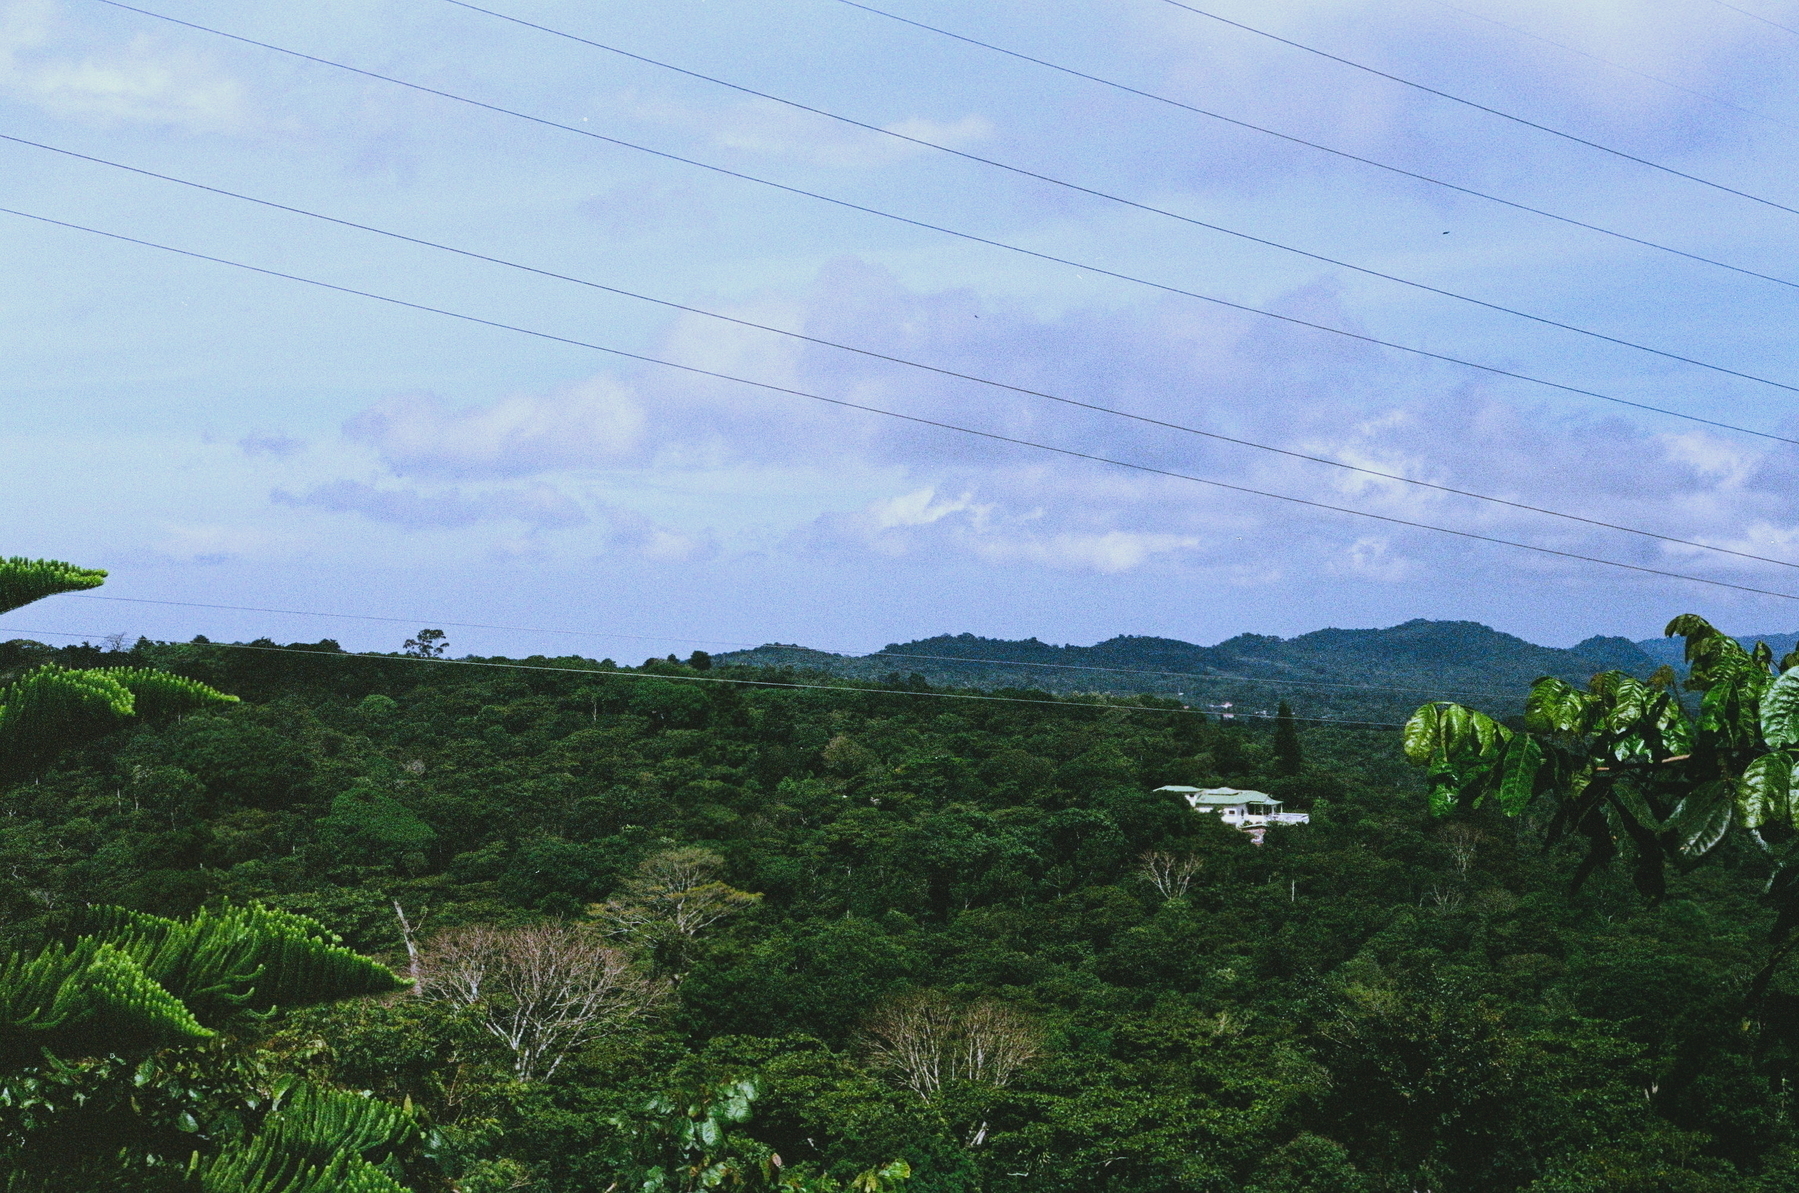 Zip lines stretch across blue skies and green vegetation in the Salvadoran countryside